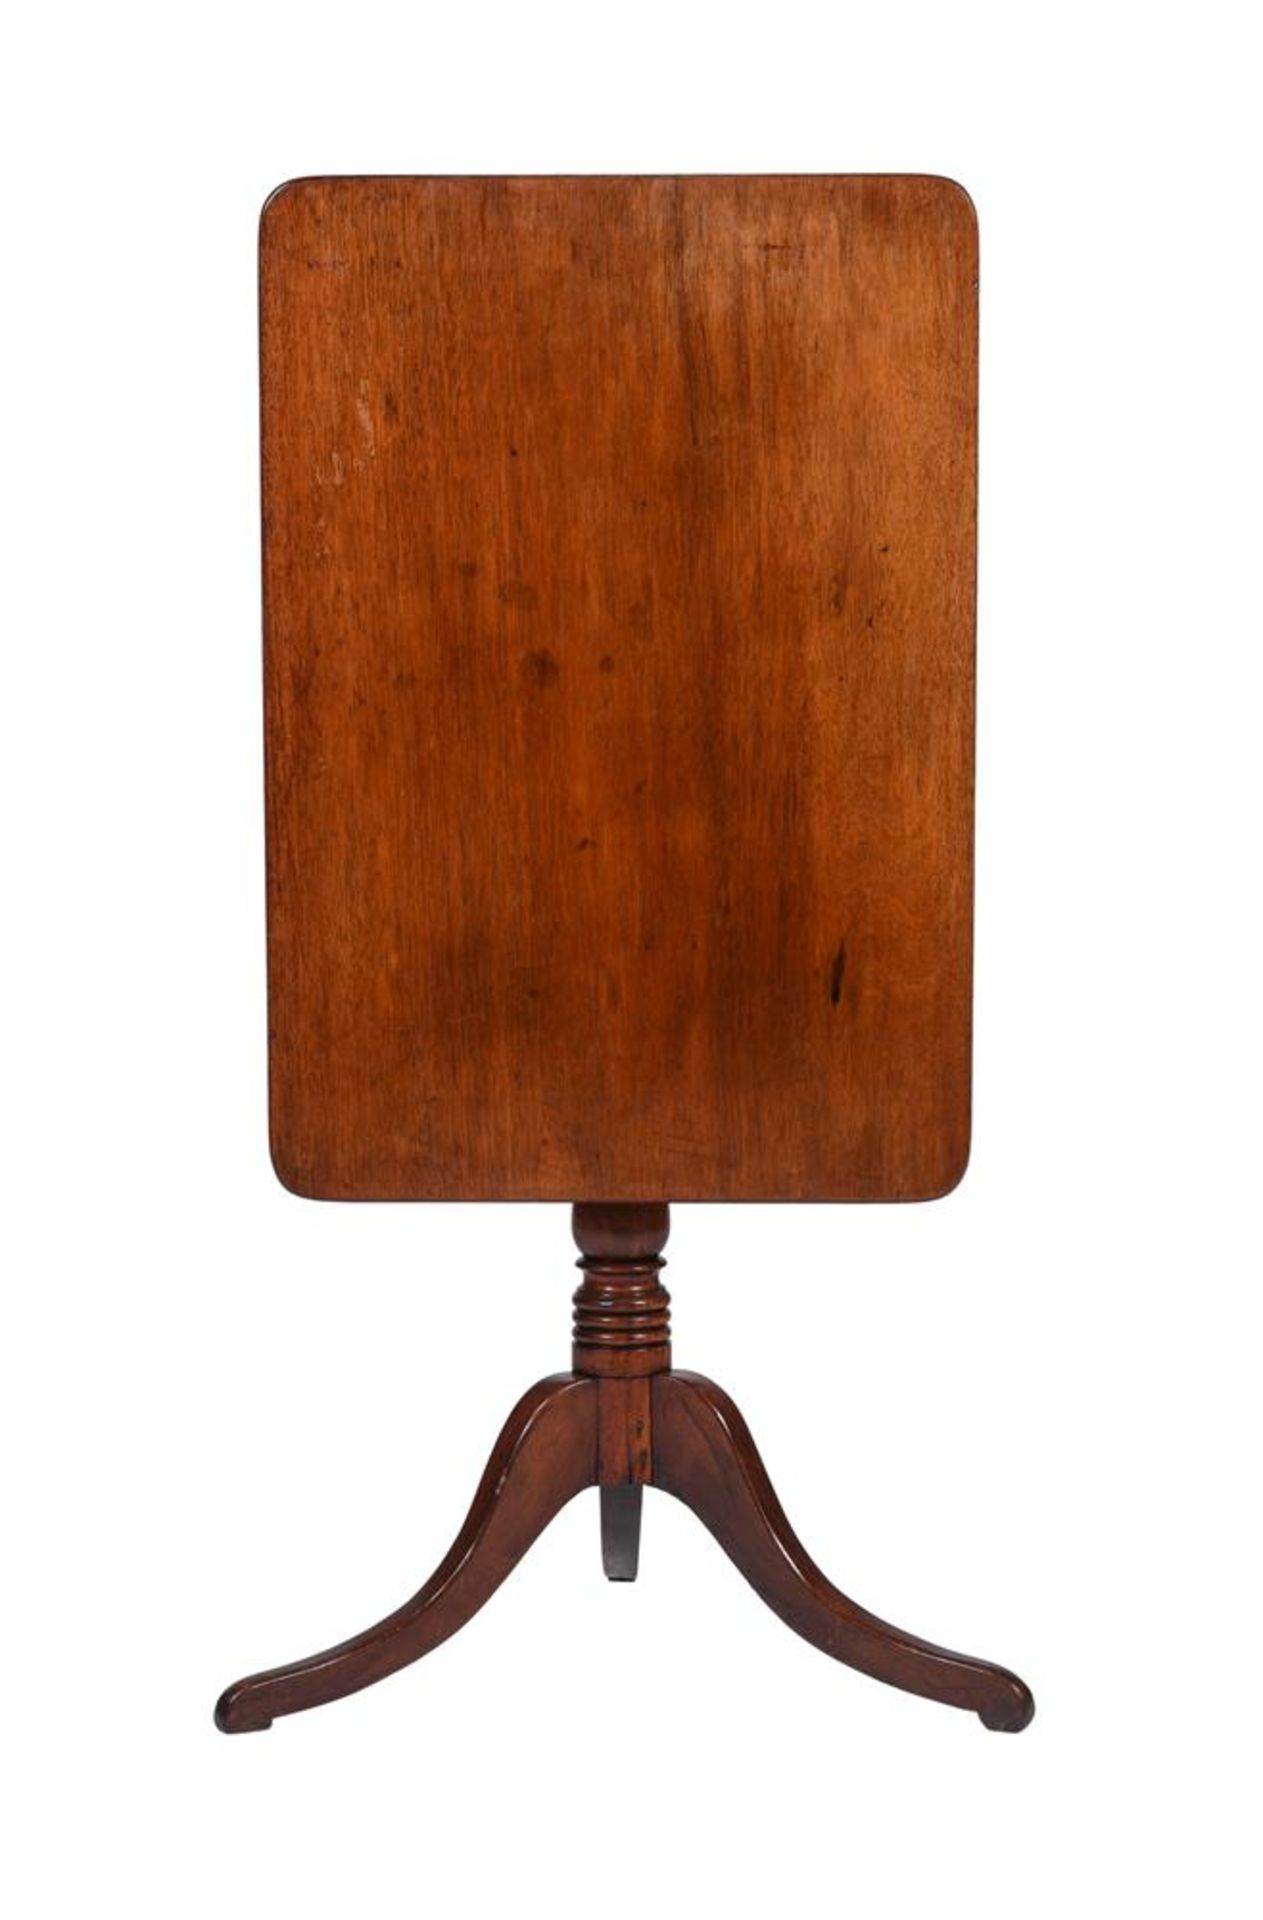 A REGENCY MAHOGANY OCCASIONAL TABLE - Image 2 of 2